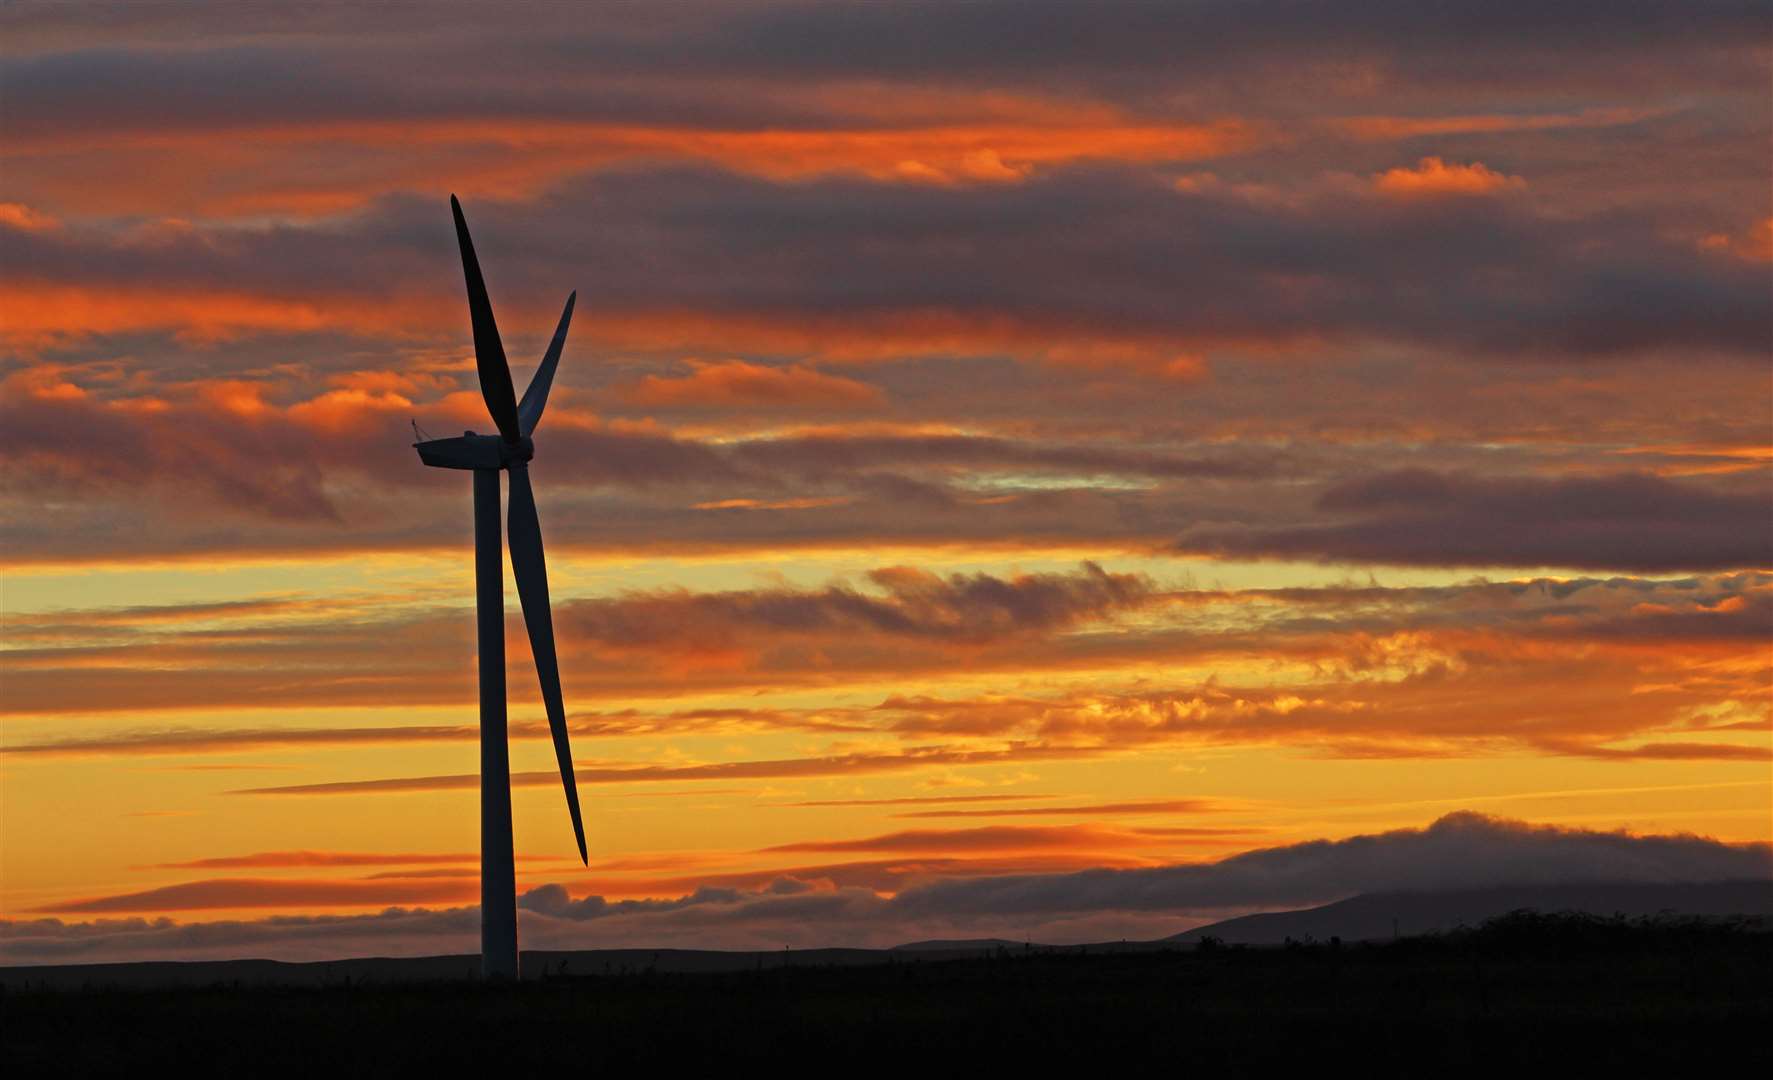 The Causewaymire wind farm is just one of many around Caithness producing vast amounts of green energy. Picture: Alan Hendry